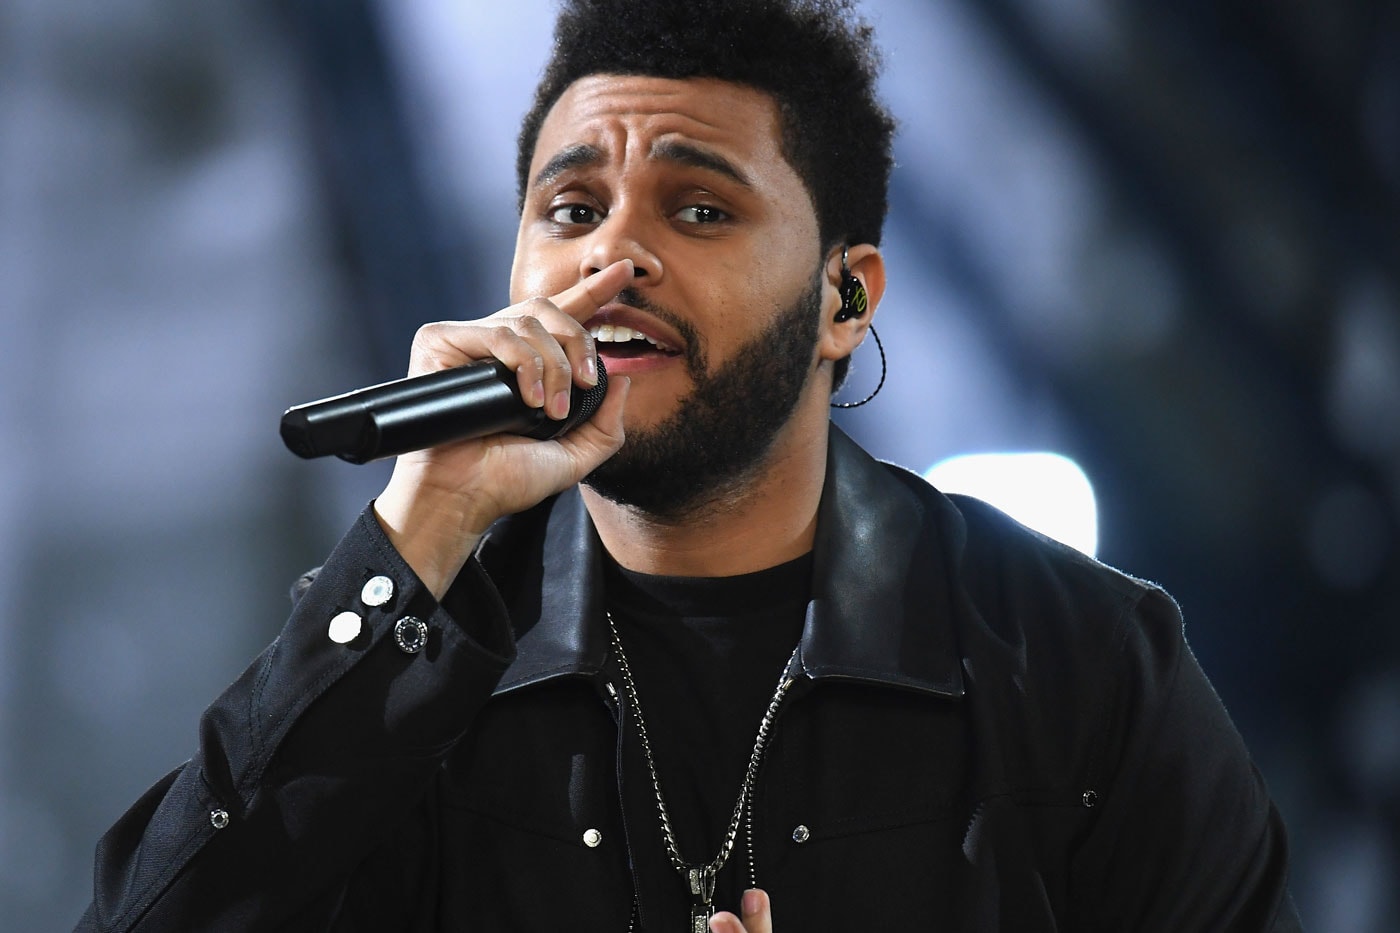 Watch The Weeknd's Live Performance From the Apple Music Festival